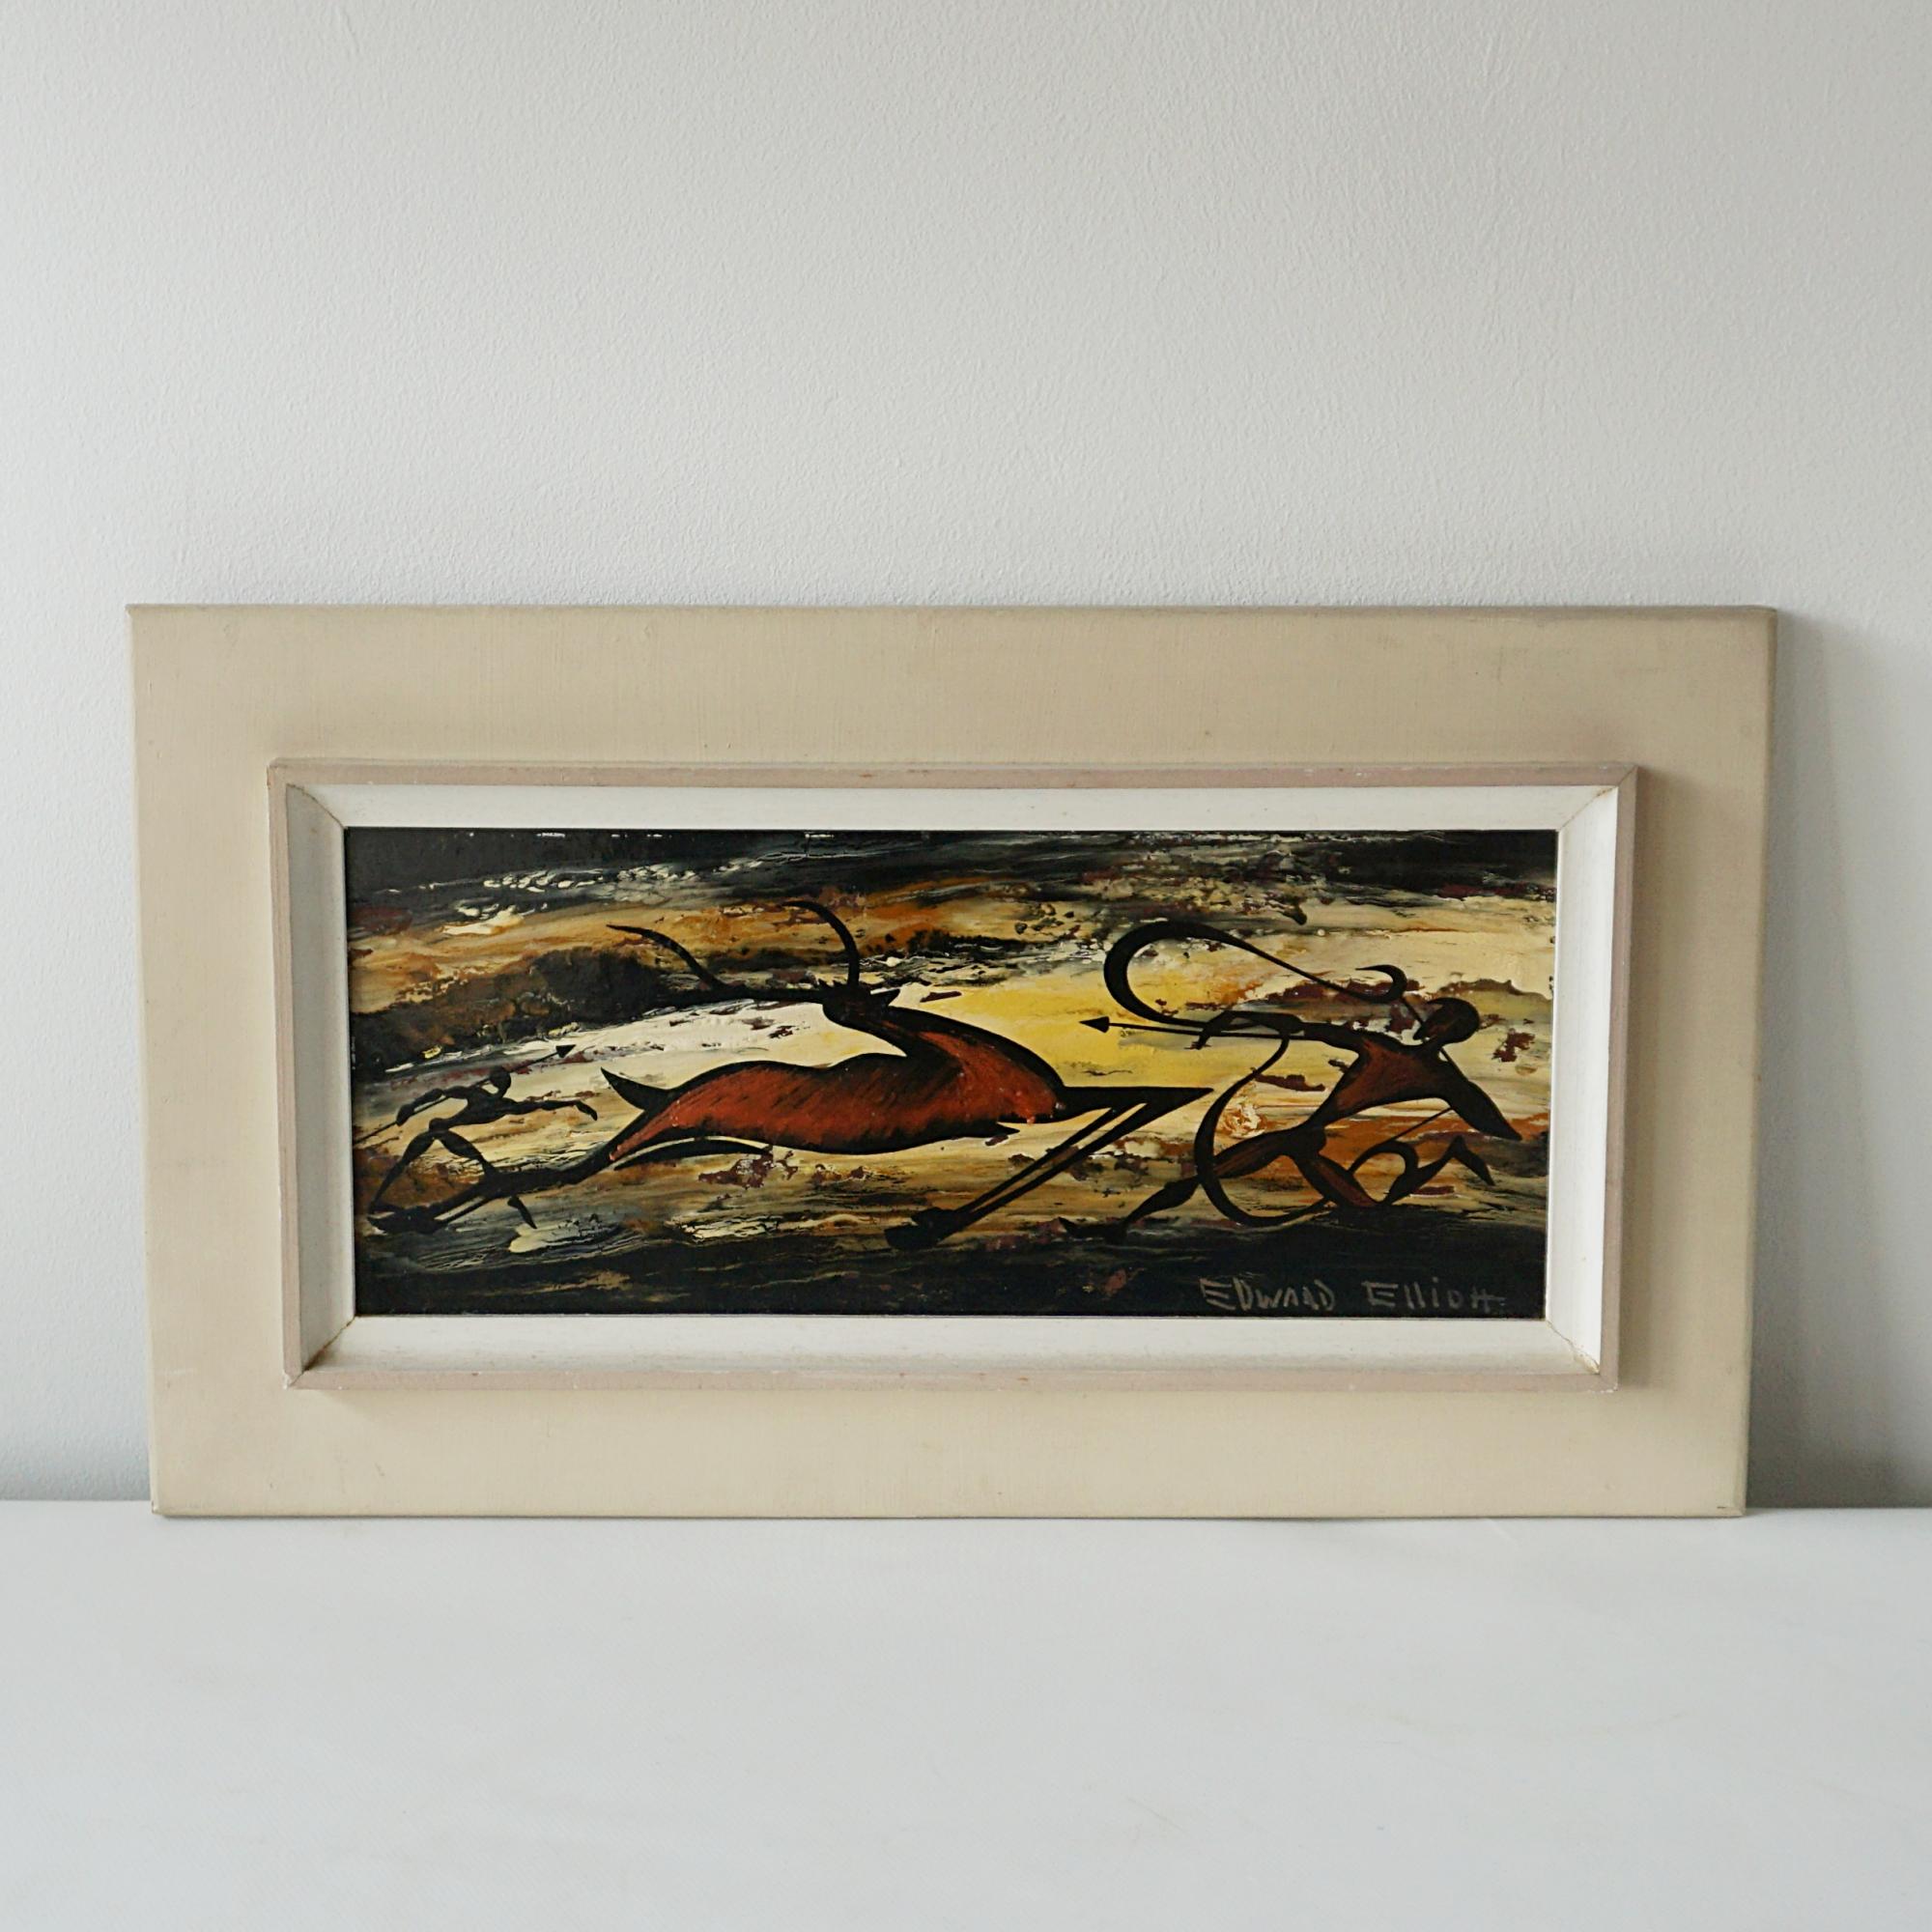 A Mid-Century oil on board expressionist painting by Edward M. Elliott depicting a hunting scene. Signed to lower right. 

Dimensions: H 30cm W 53.5cm D 3cm 

Origin: English 

Date: Circa 1940

Item Number: 1004242